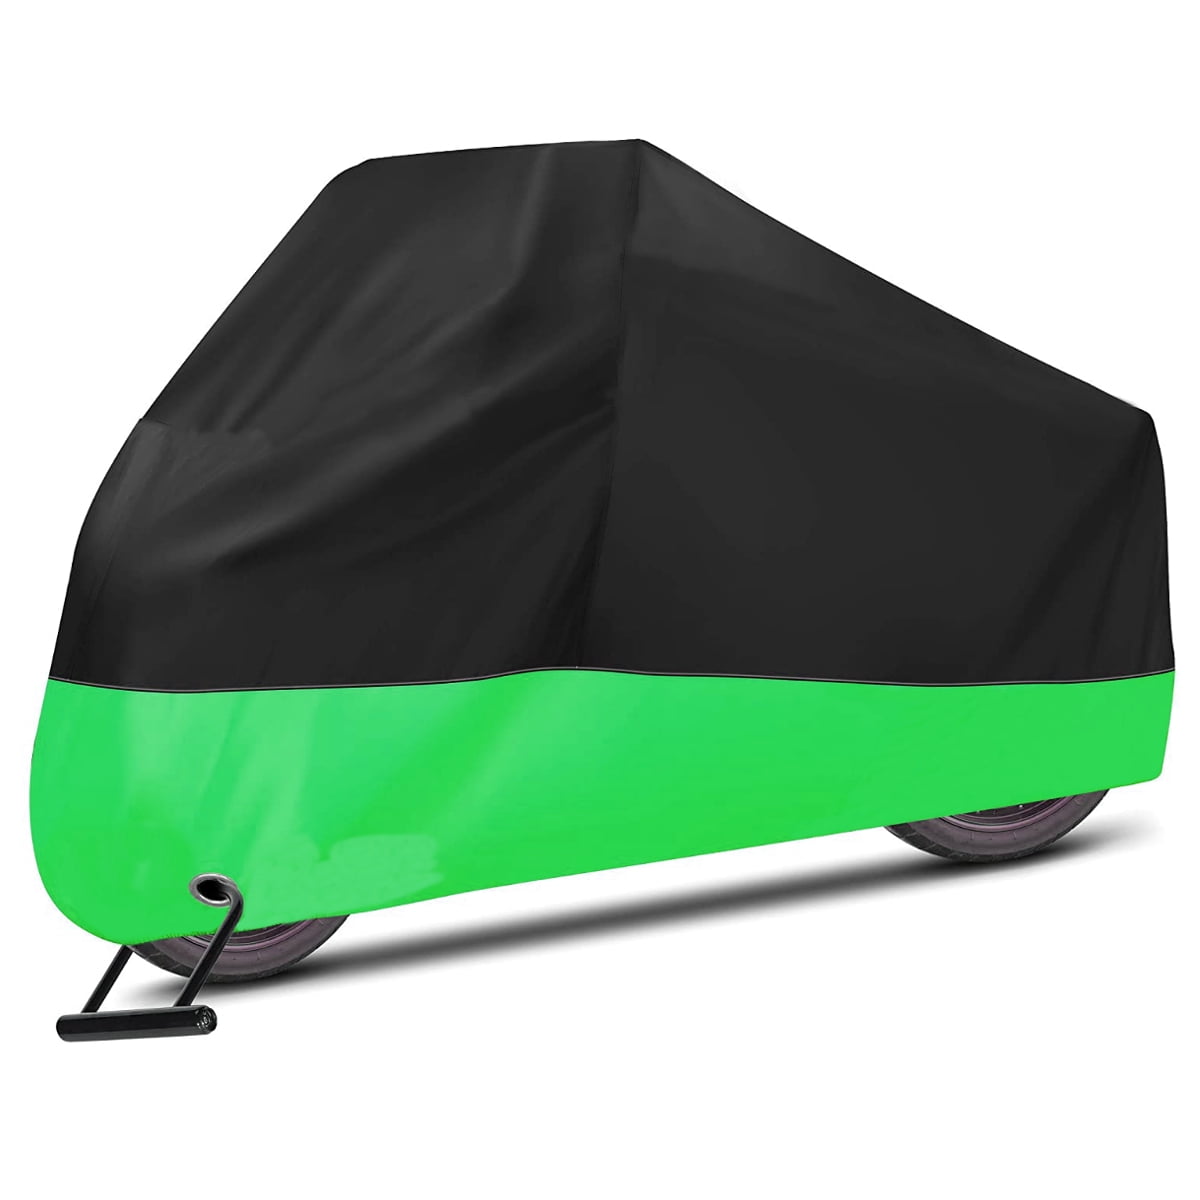 XXXL Green Motorcycle Cover for Harley Davidson Street Glide 2006-2016 2013 2014 